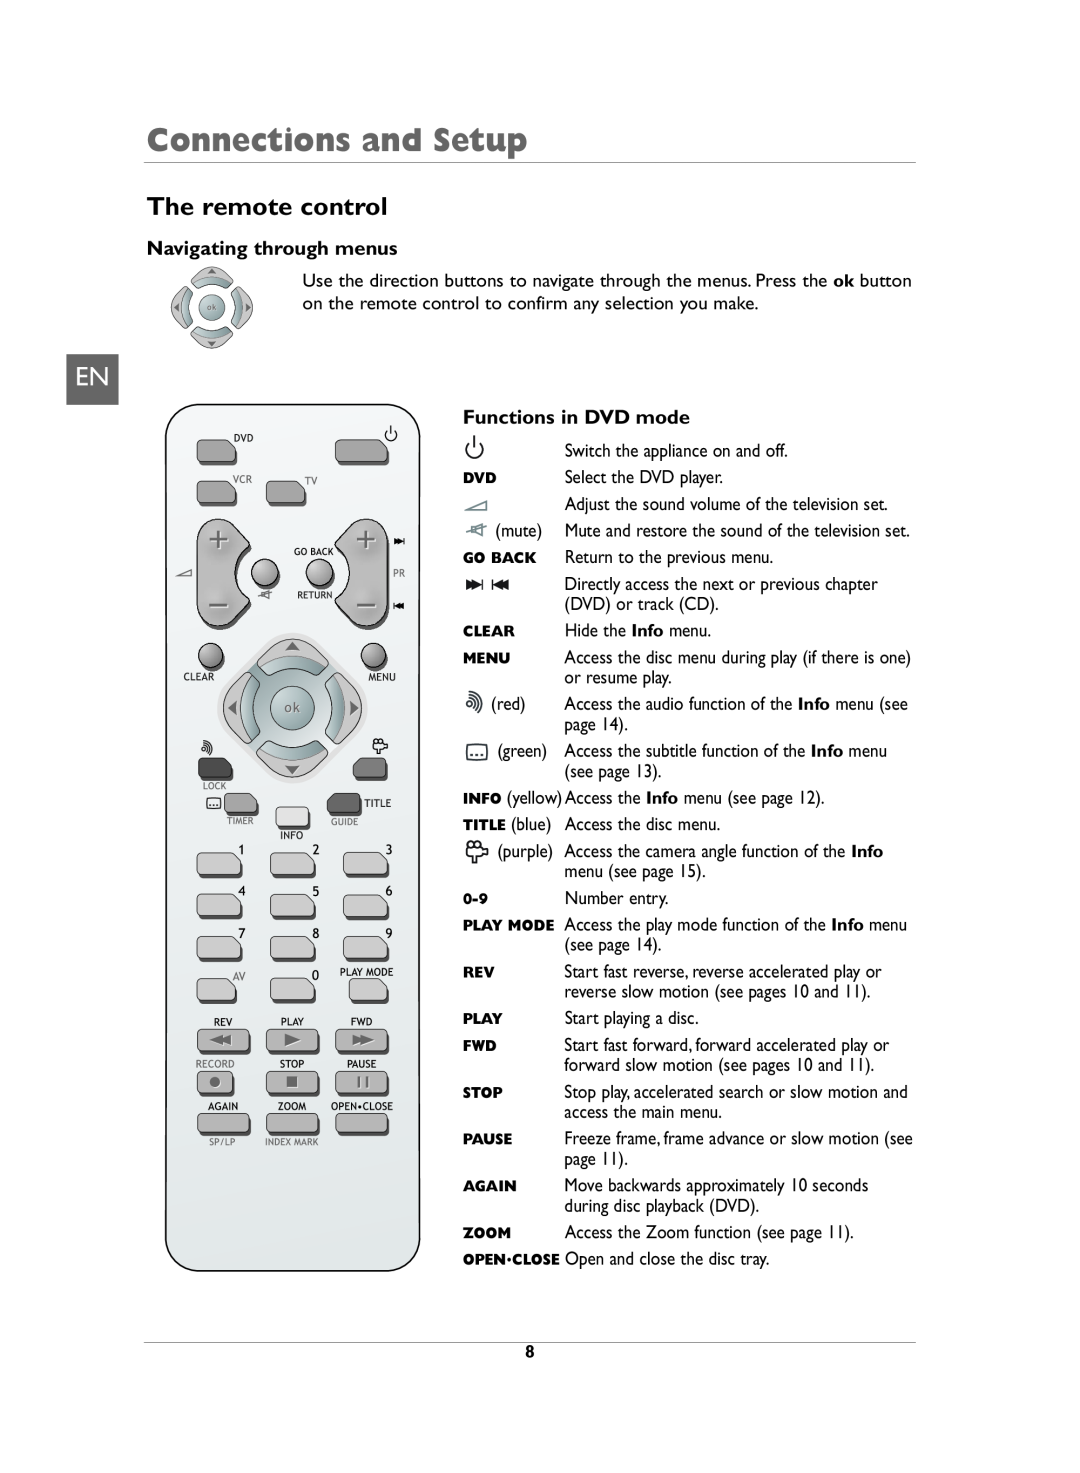 Technicolor - Thomson DVD110 The remote control, Navigating through menus, Functions in DVD mode, Connections and Setup 